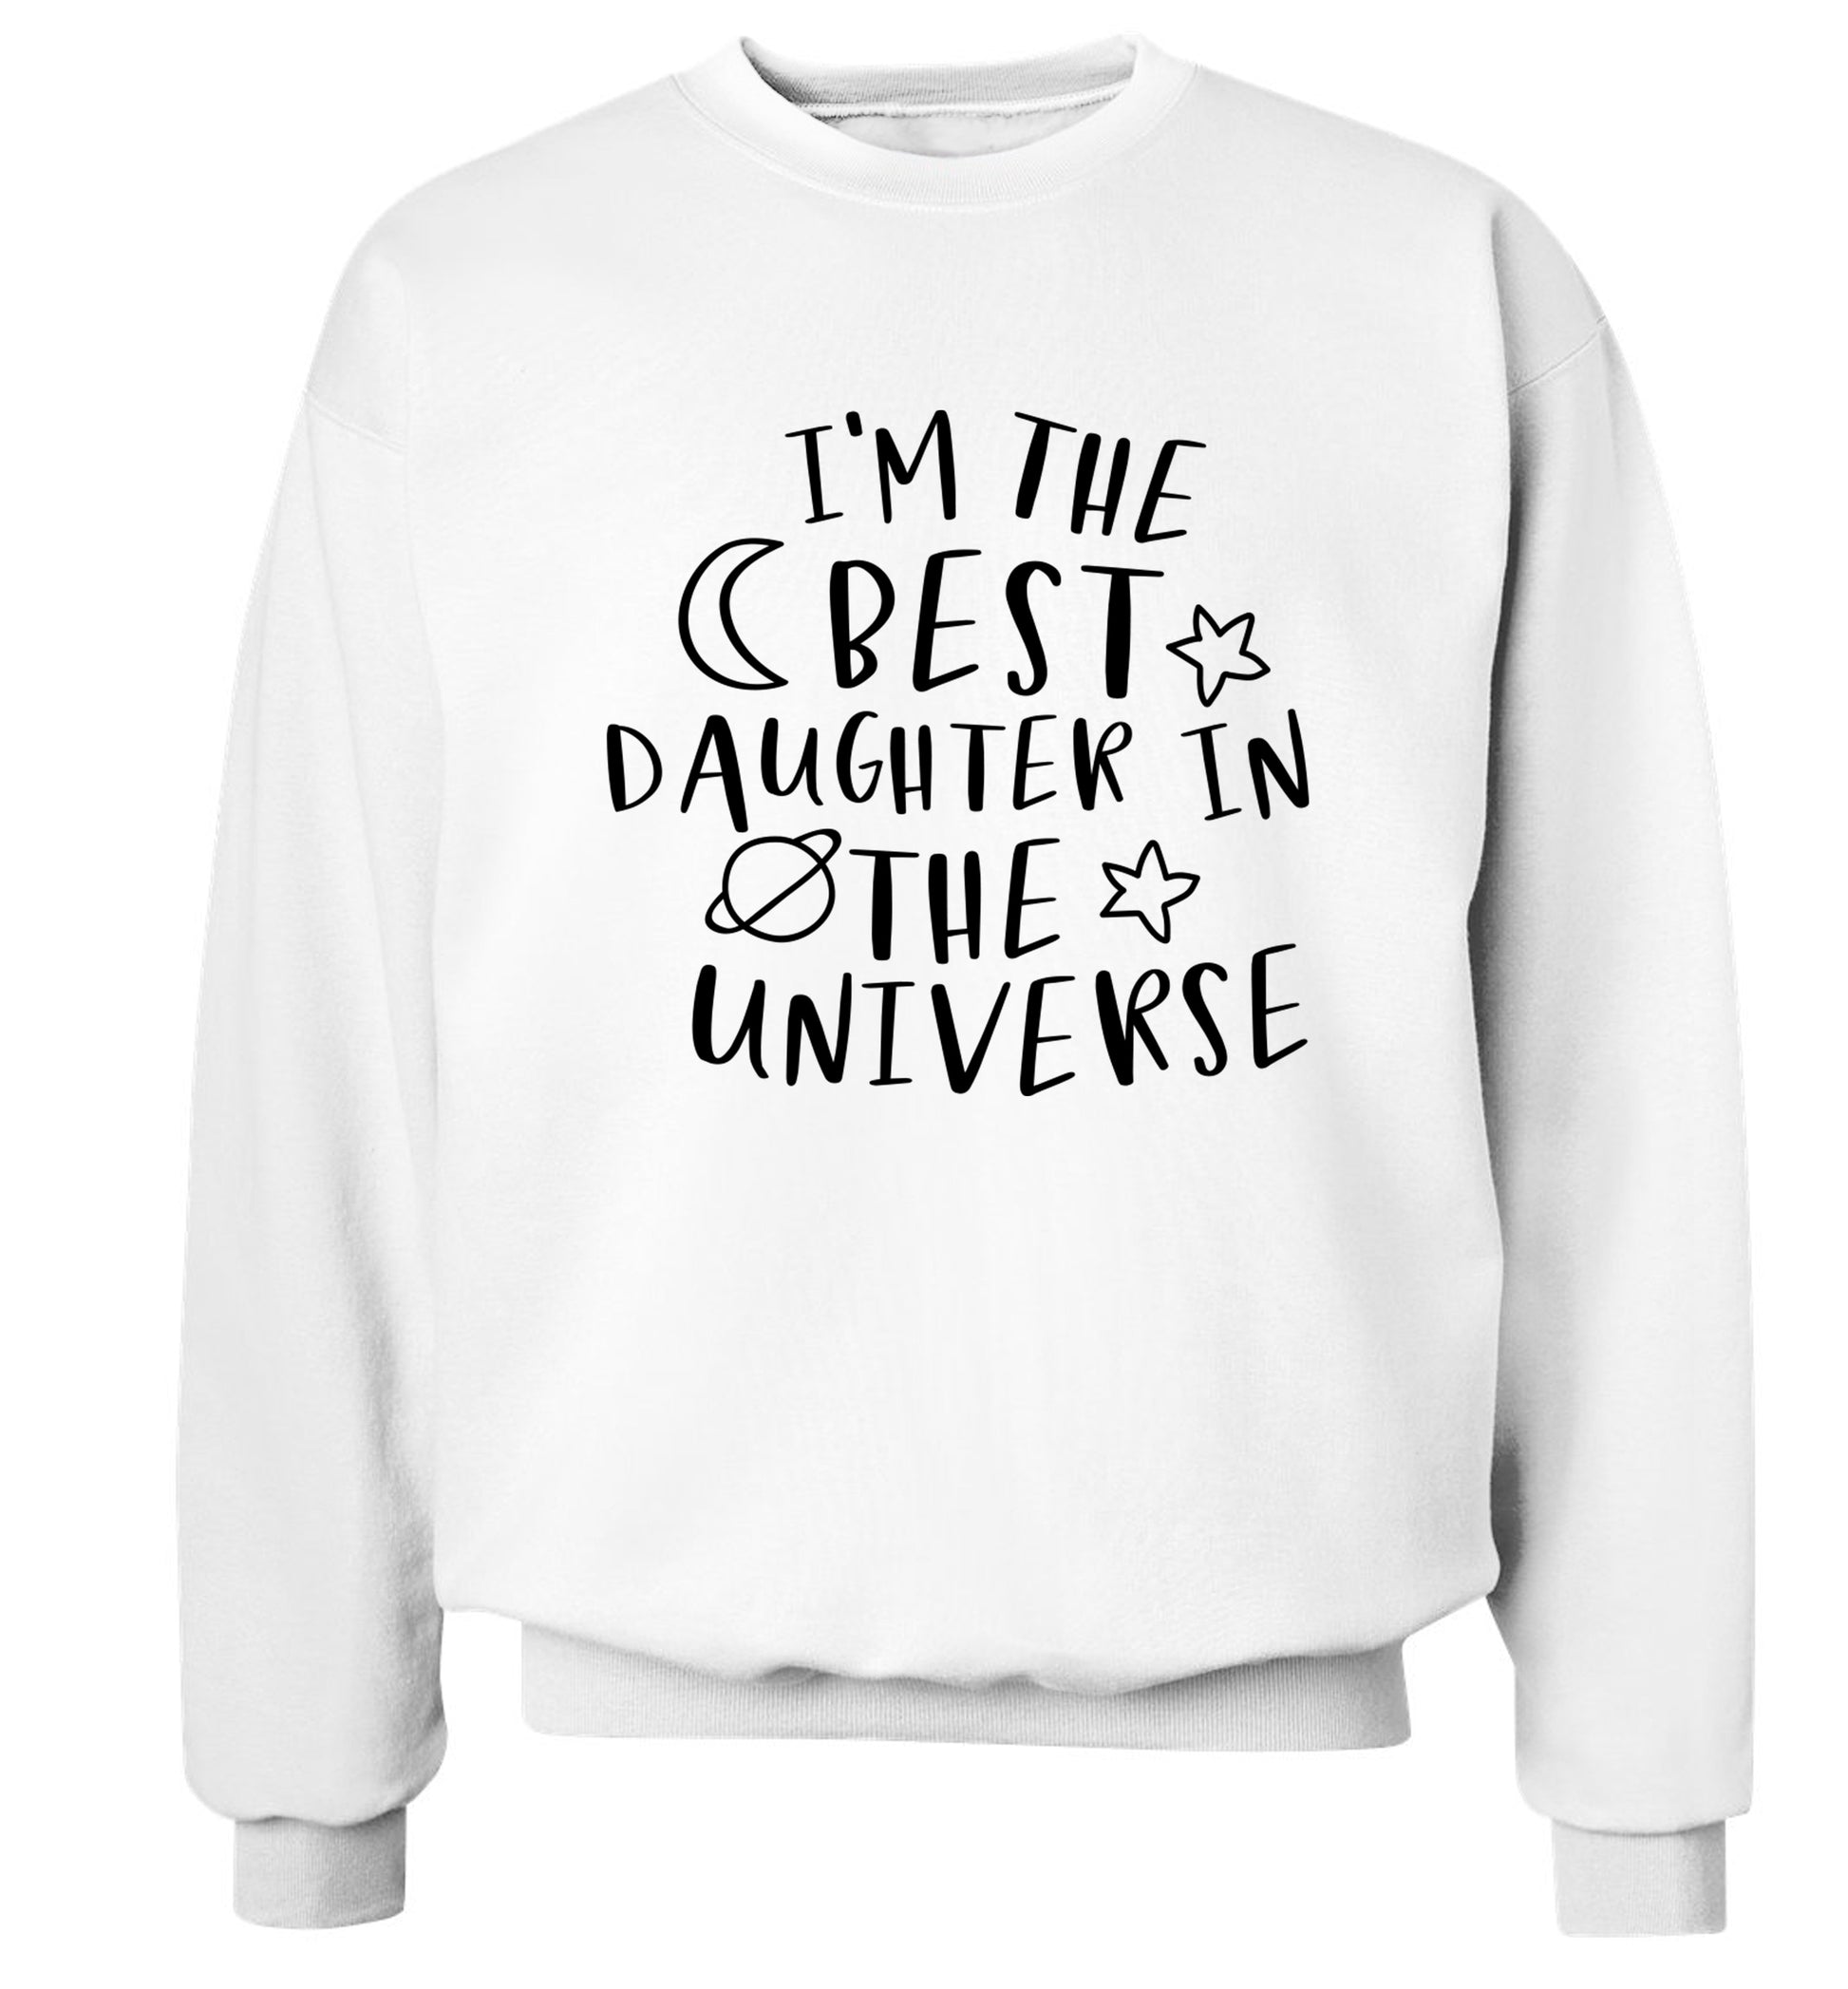 I'm the best daughter in the universe Adult's unisex white Sweater 2XL